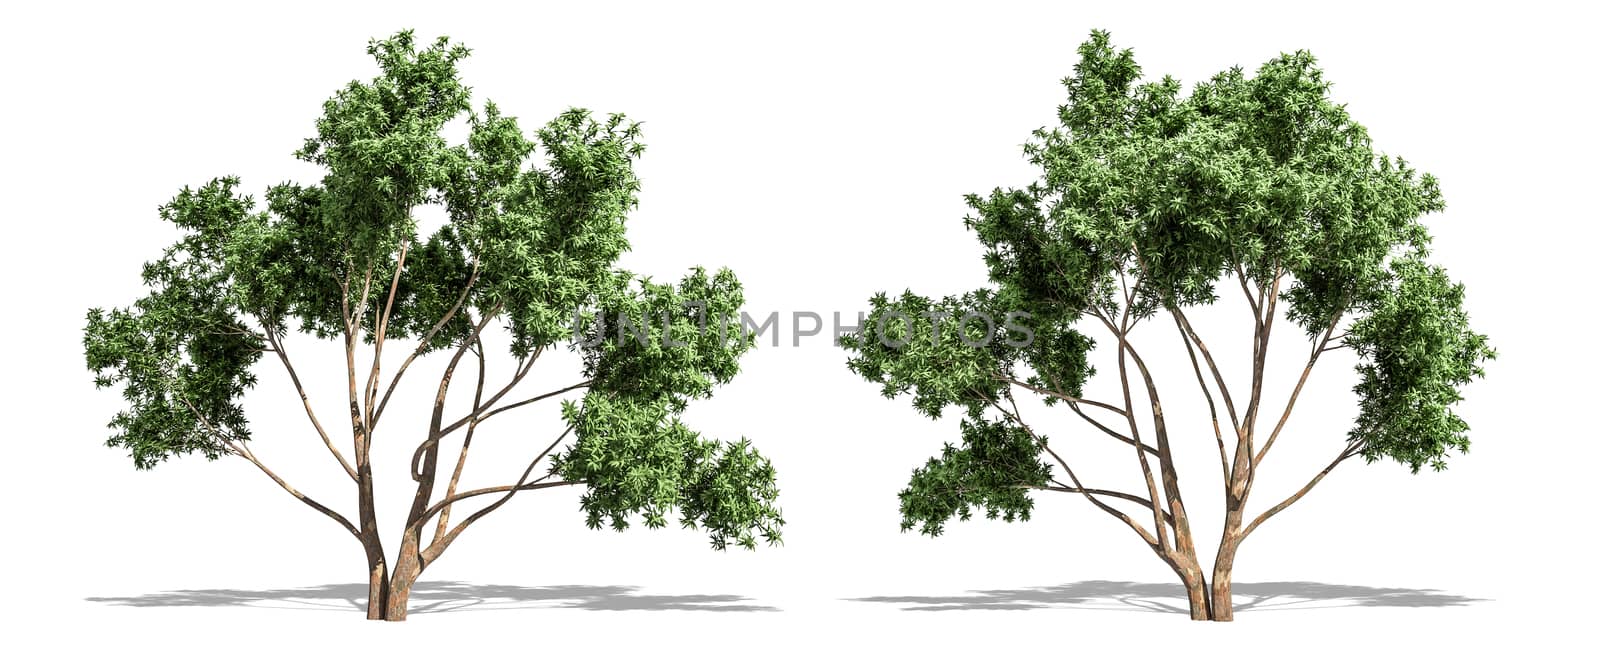 Beautiful Eucalyptus tree isolated and cutting on a white background with clipping path.